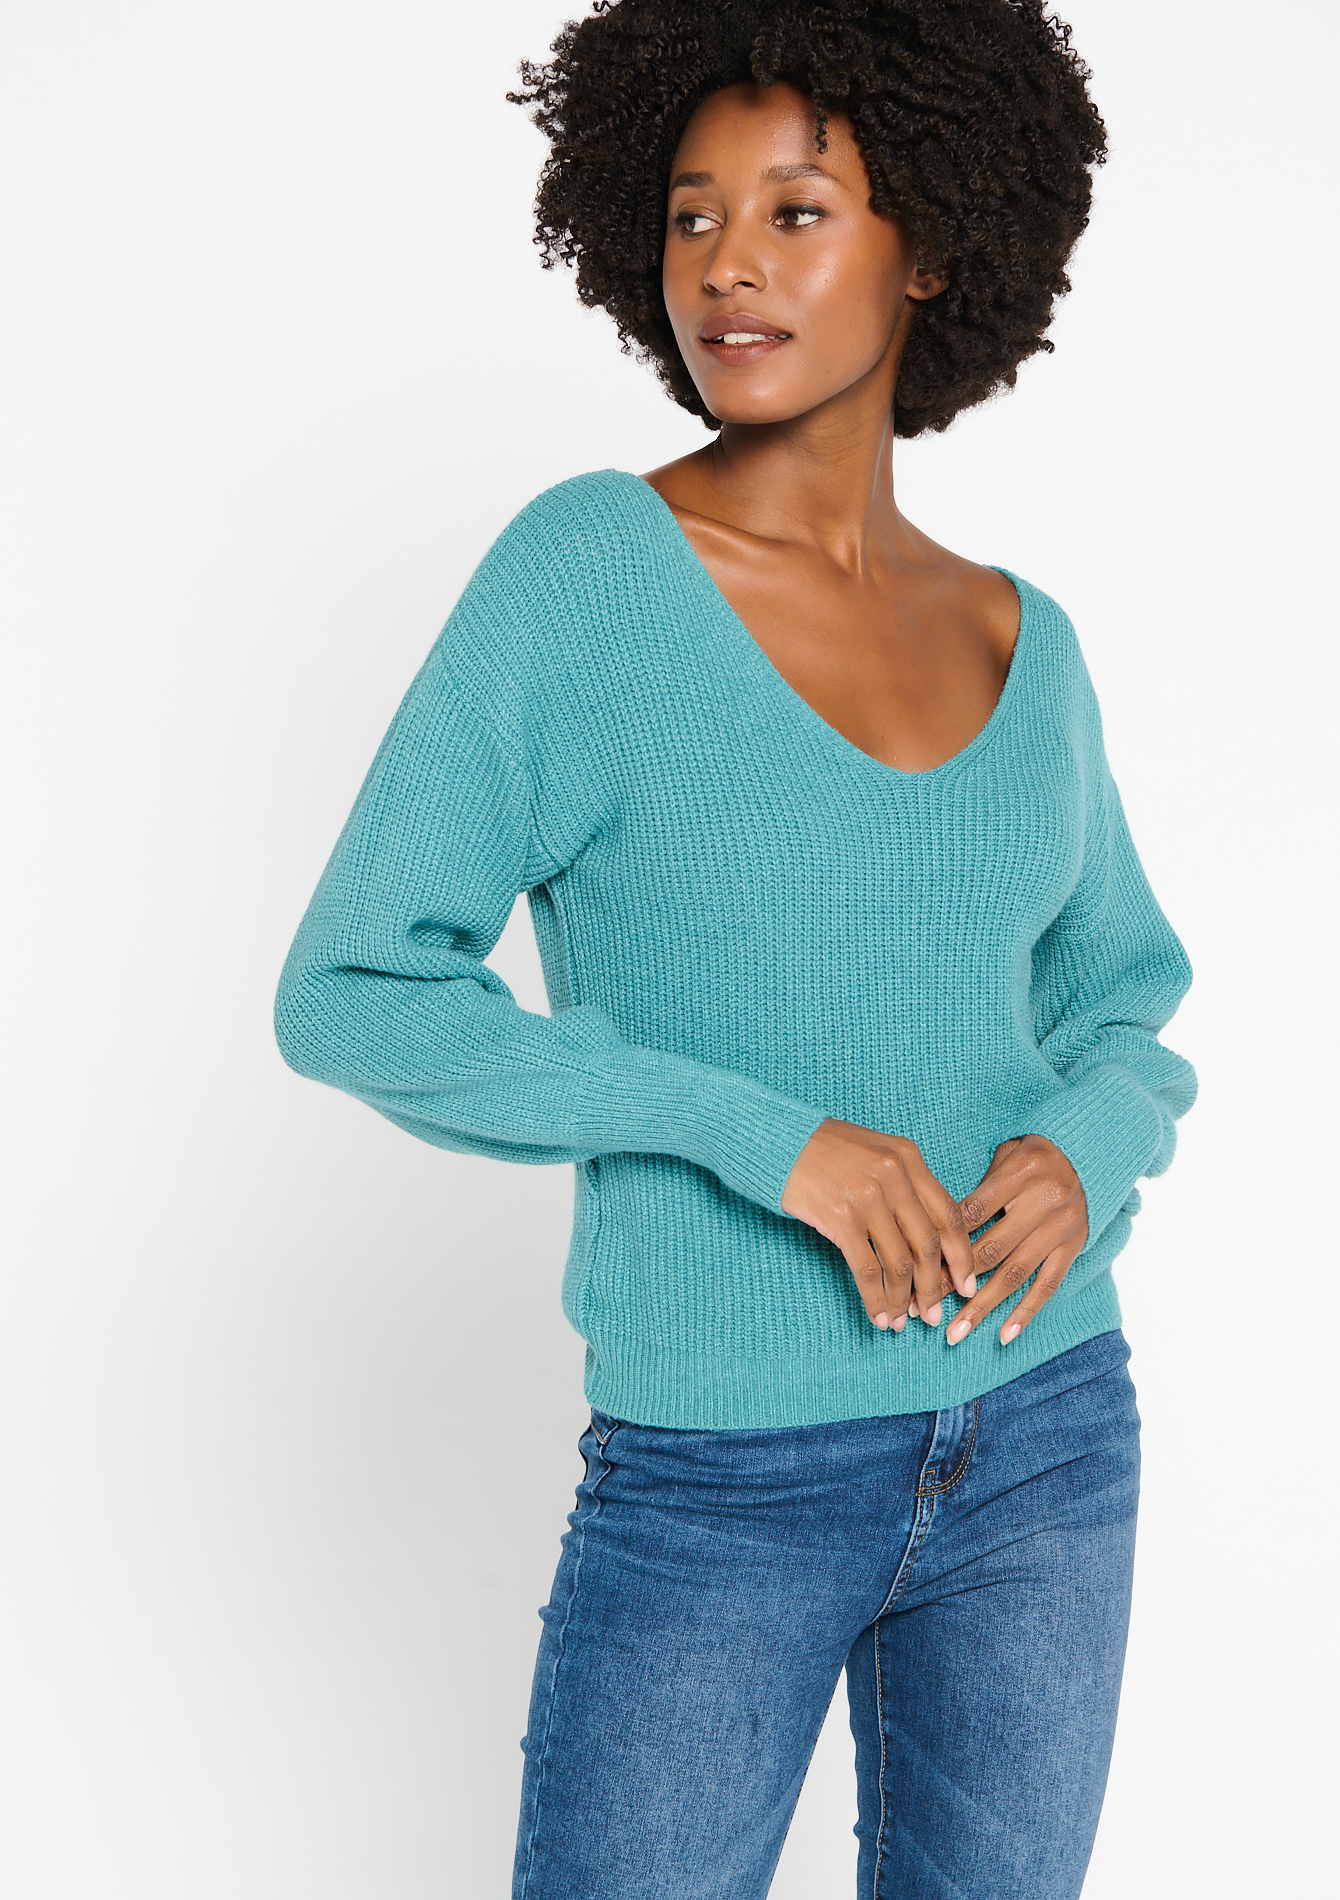 Knitted sweater with wide V-neck - BLUE DUCK - 04005694_2922